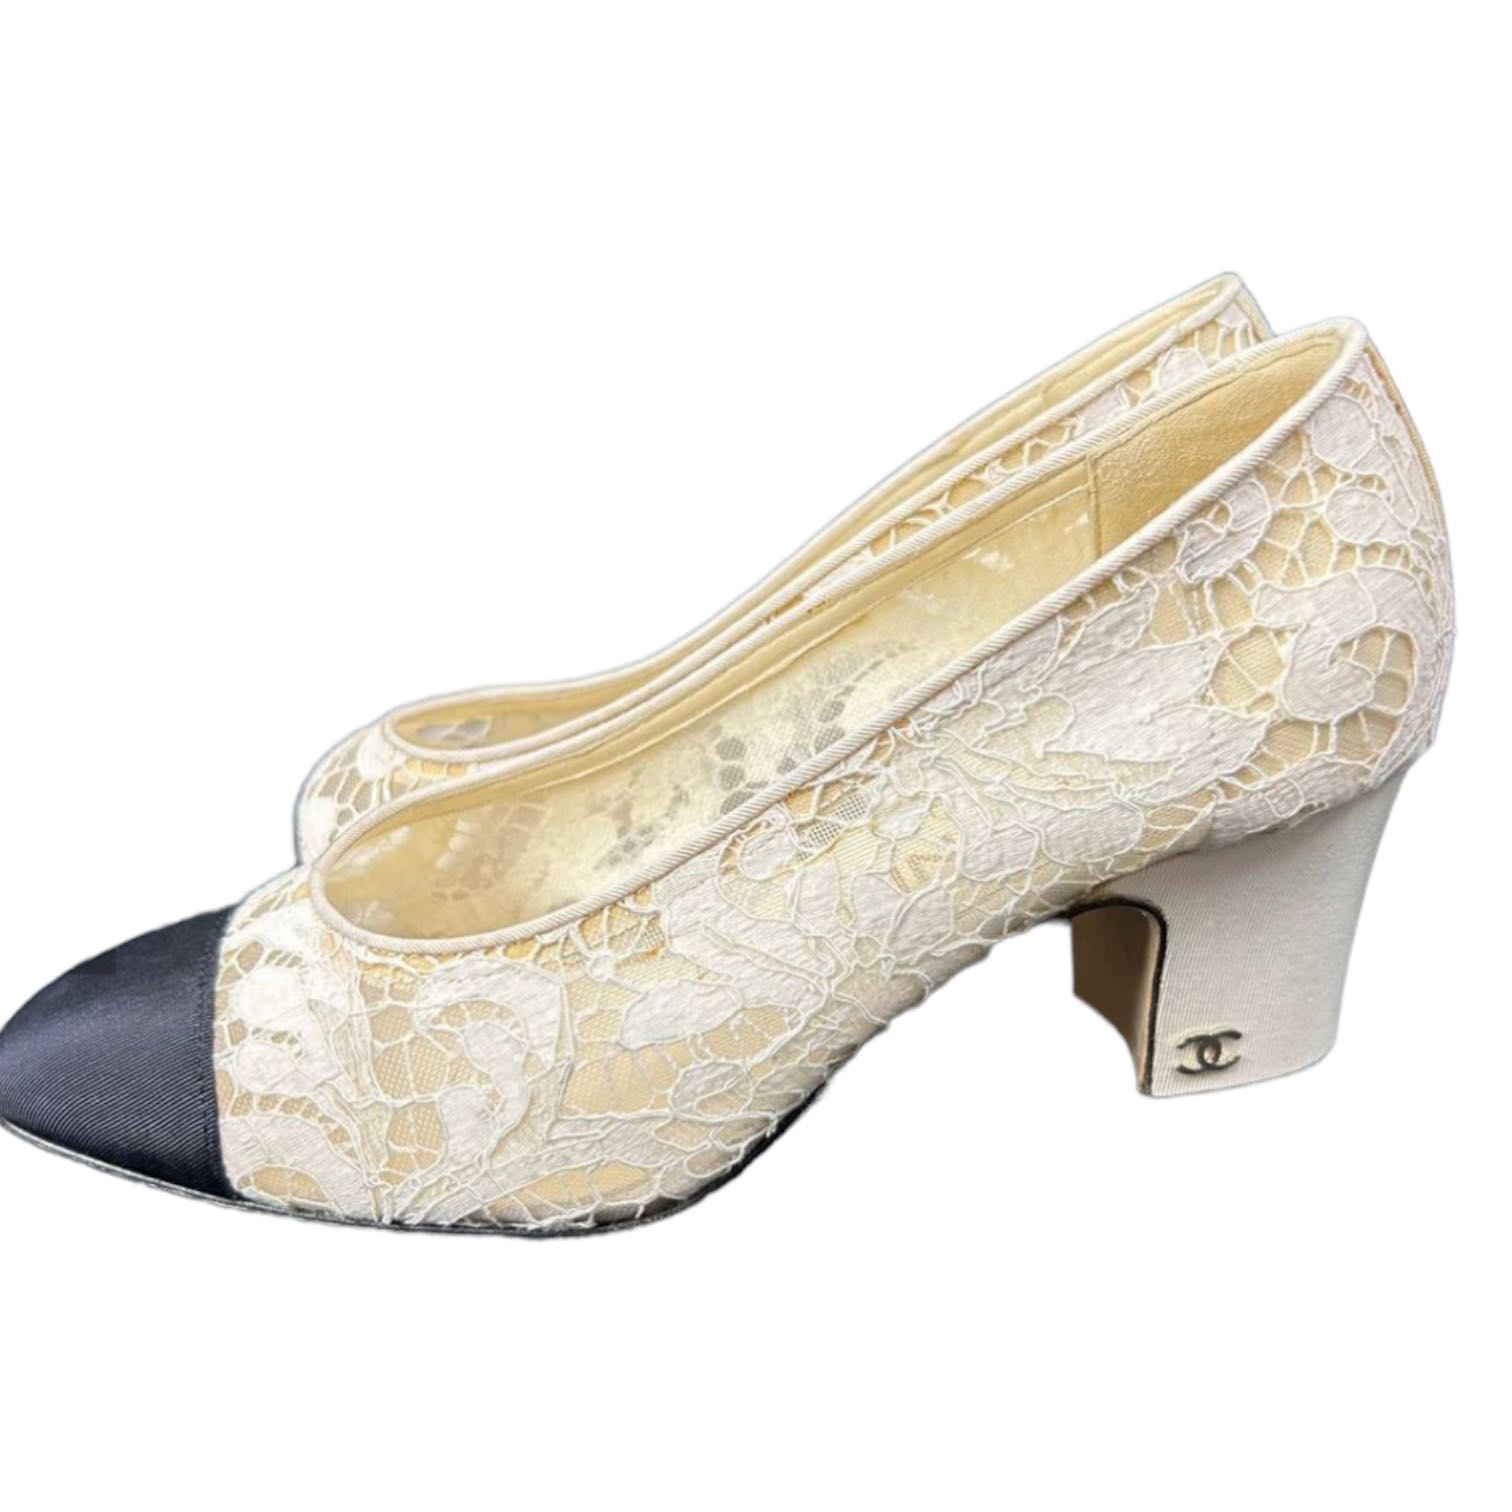 Chanel Sheer Lace with Contrast Toe Caps and Grosgrain Details Pumps - 1